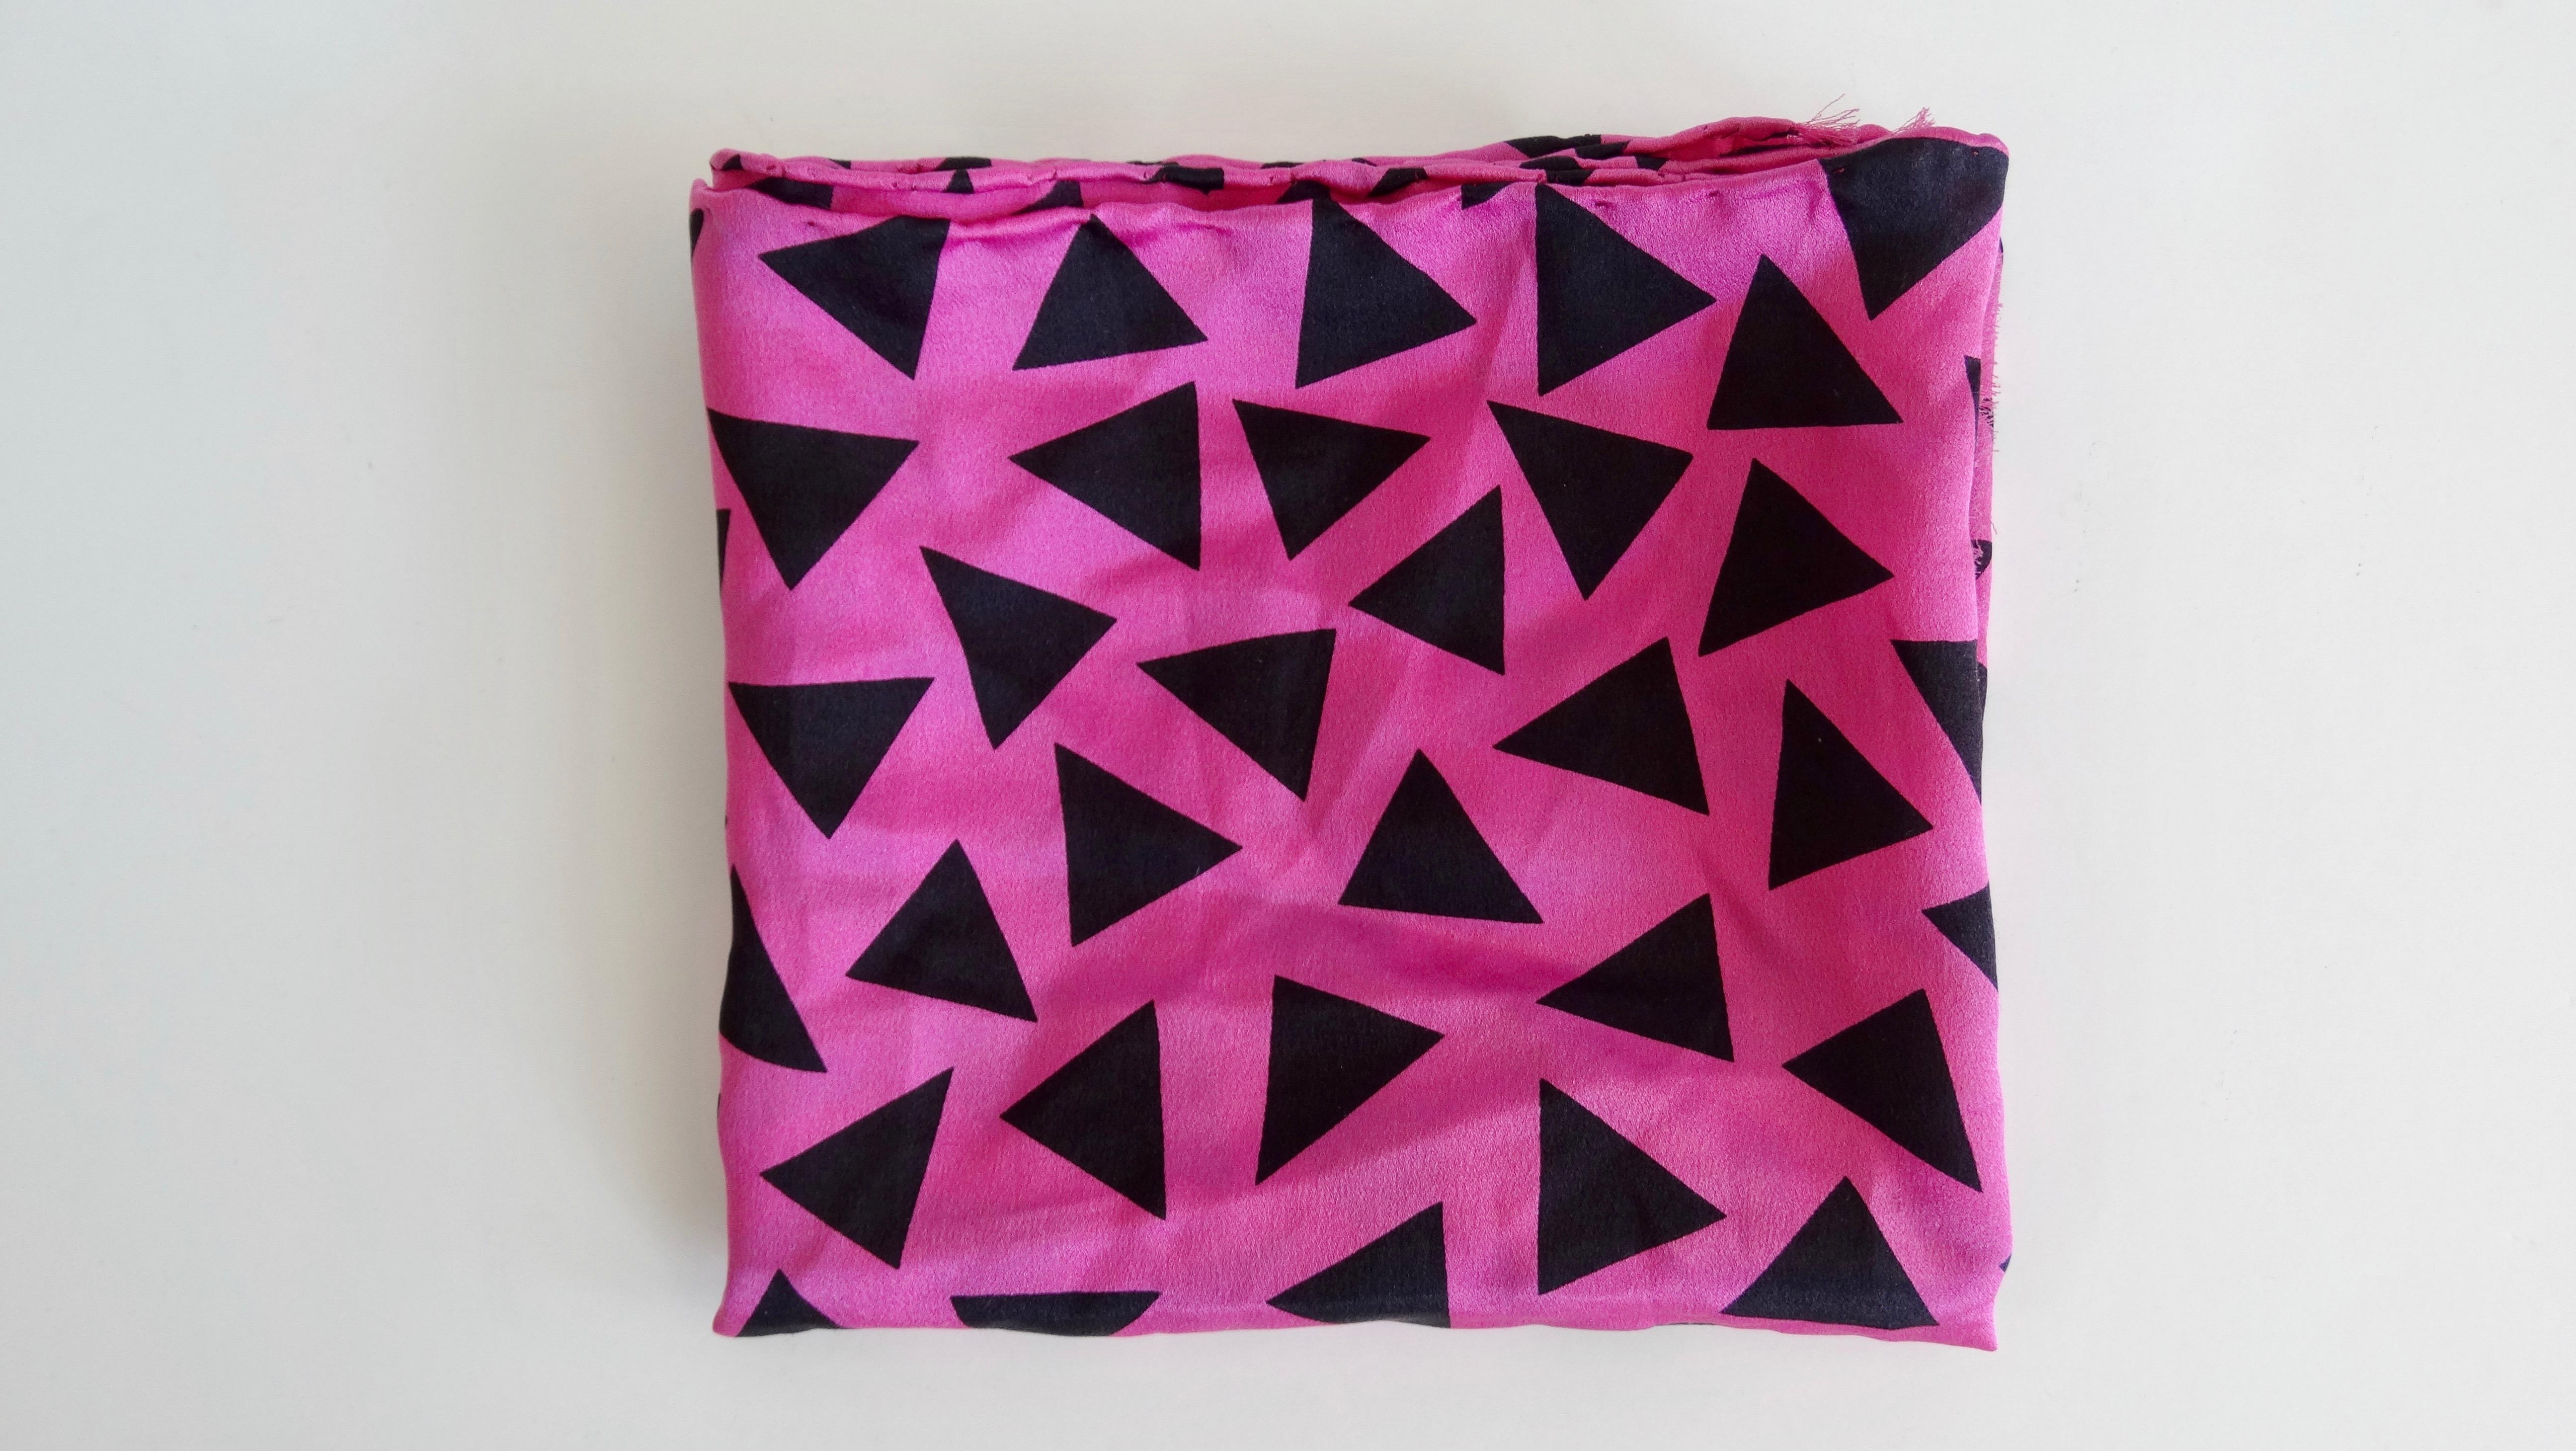 Elevate your look with this amazing Memphis Milano scarf! Circa 1980s, this Silk scarf features a geometric design created by Memphis Milano member and creator, Ettore Sottsass. Comprised of multi-directional black triangles against a bright fuchsia